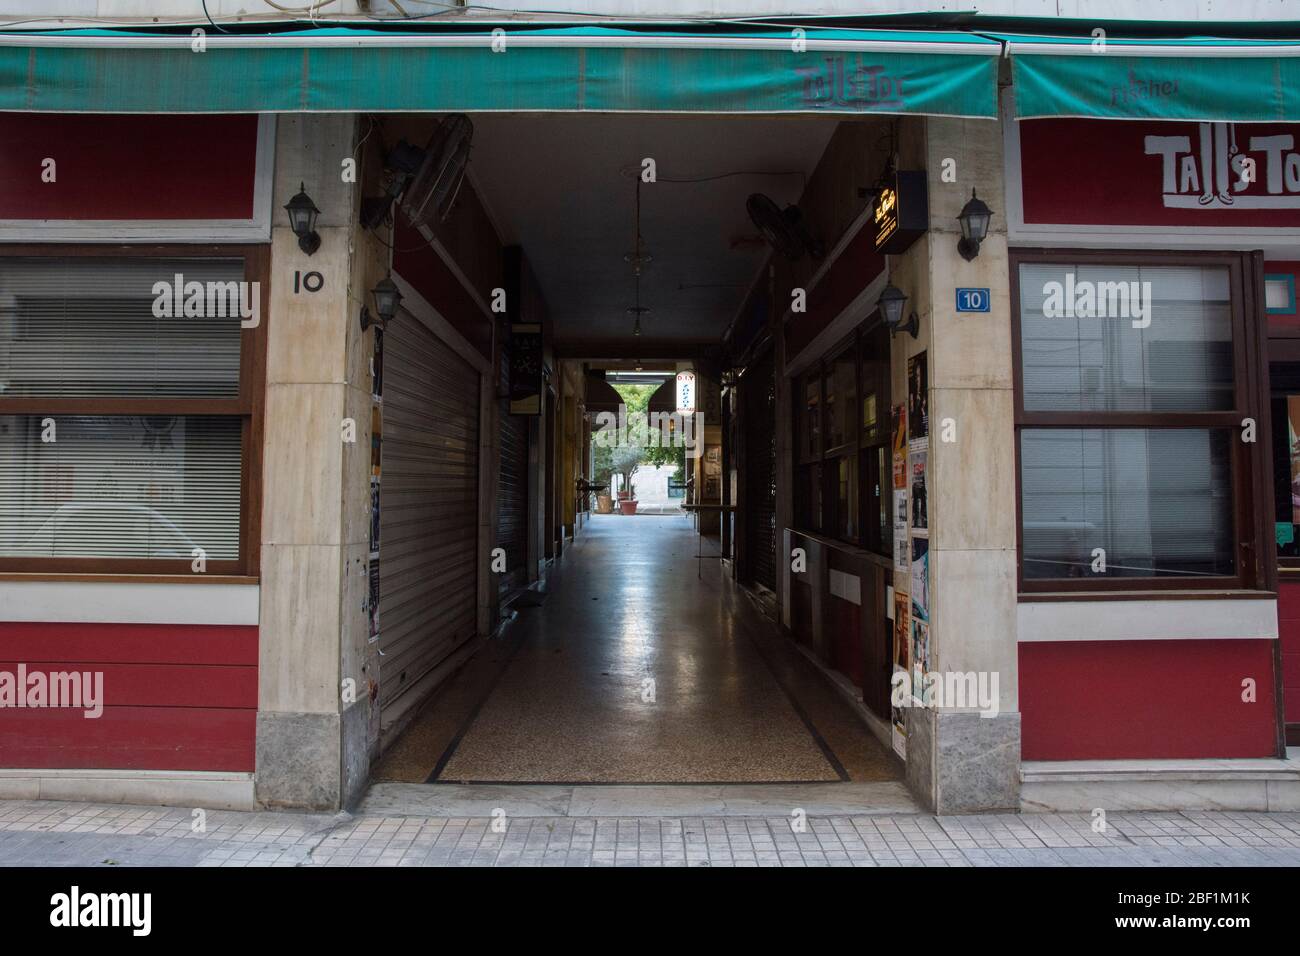 Athens, Greece. 16th Apr, 2020. Athens looks like a ghost town as people stay home and shops have been closed since March 18th. Greece on lockdown since March 22nd counts to date 2207 confirmed Covid-19 cases and 105 fatalities. Credit: Nikolas Georgiou/Alamy Live News Stock Photo